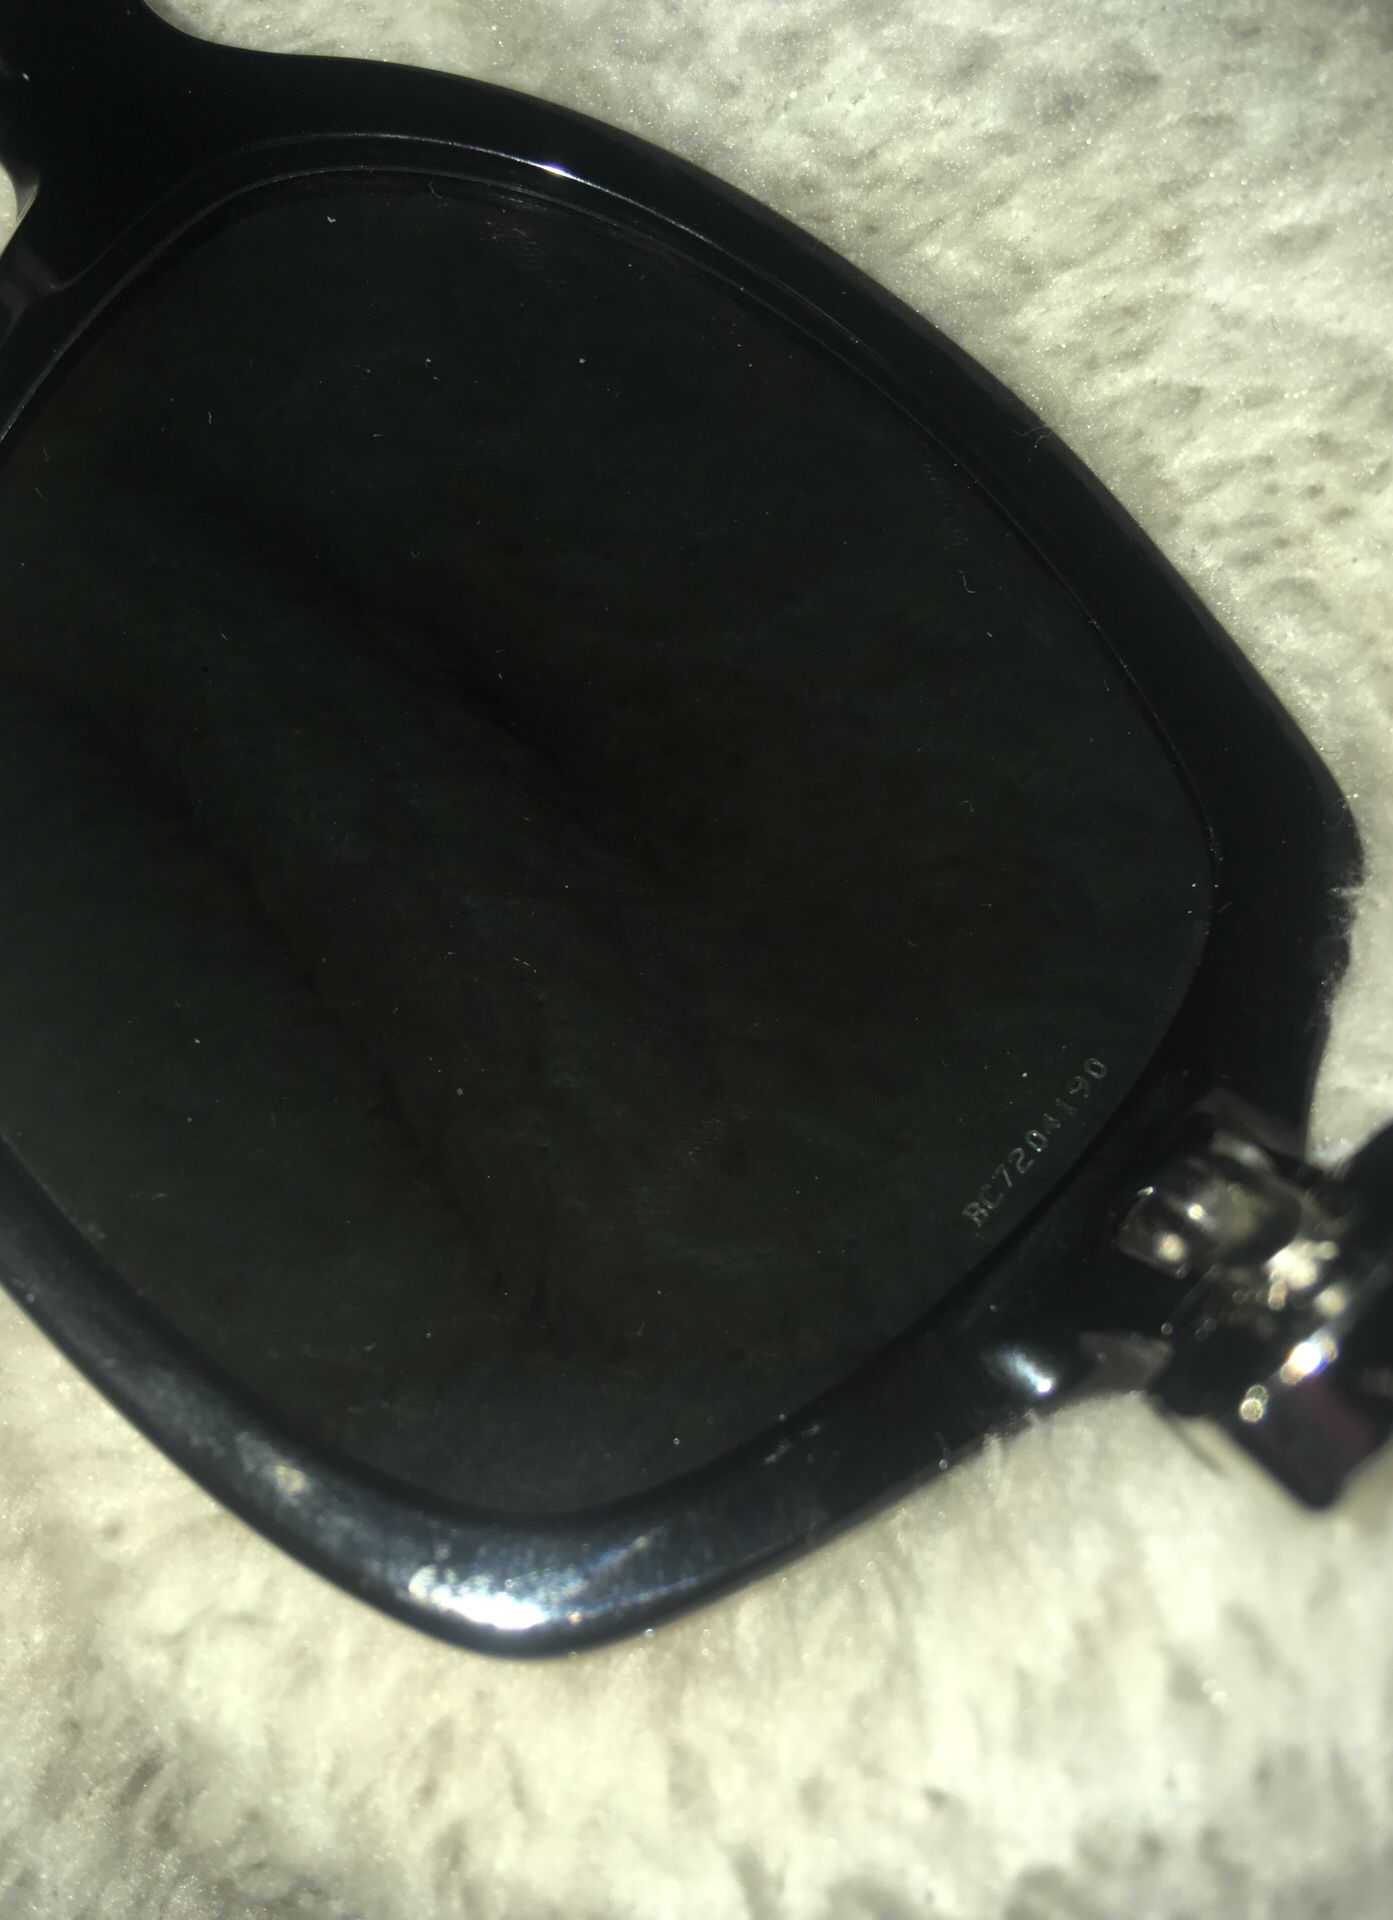 Women's CHANEL Sunglasses. *AUTHENTIC!* for Sale in Bothell, WA - OfferUp